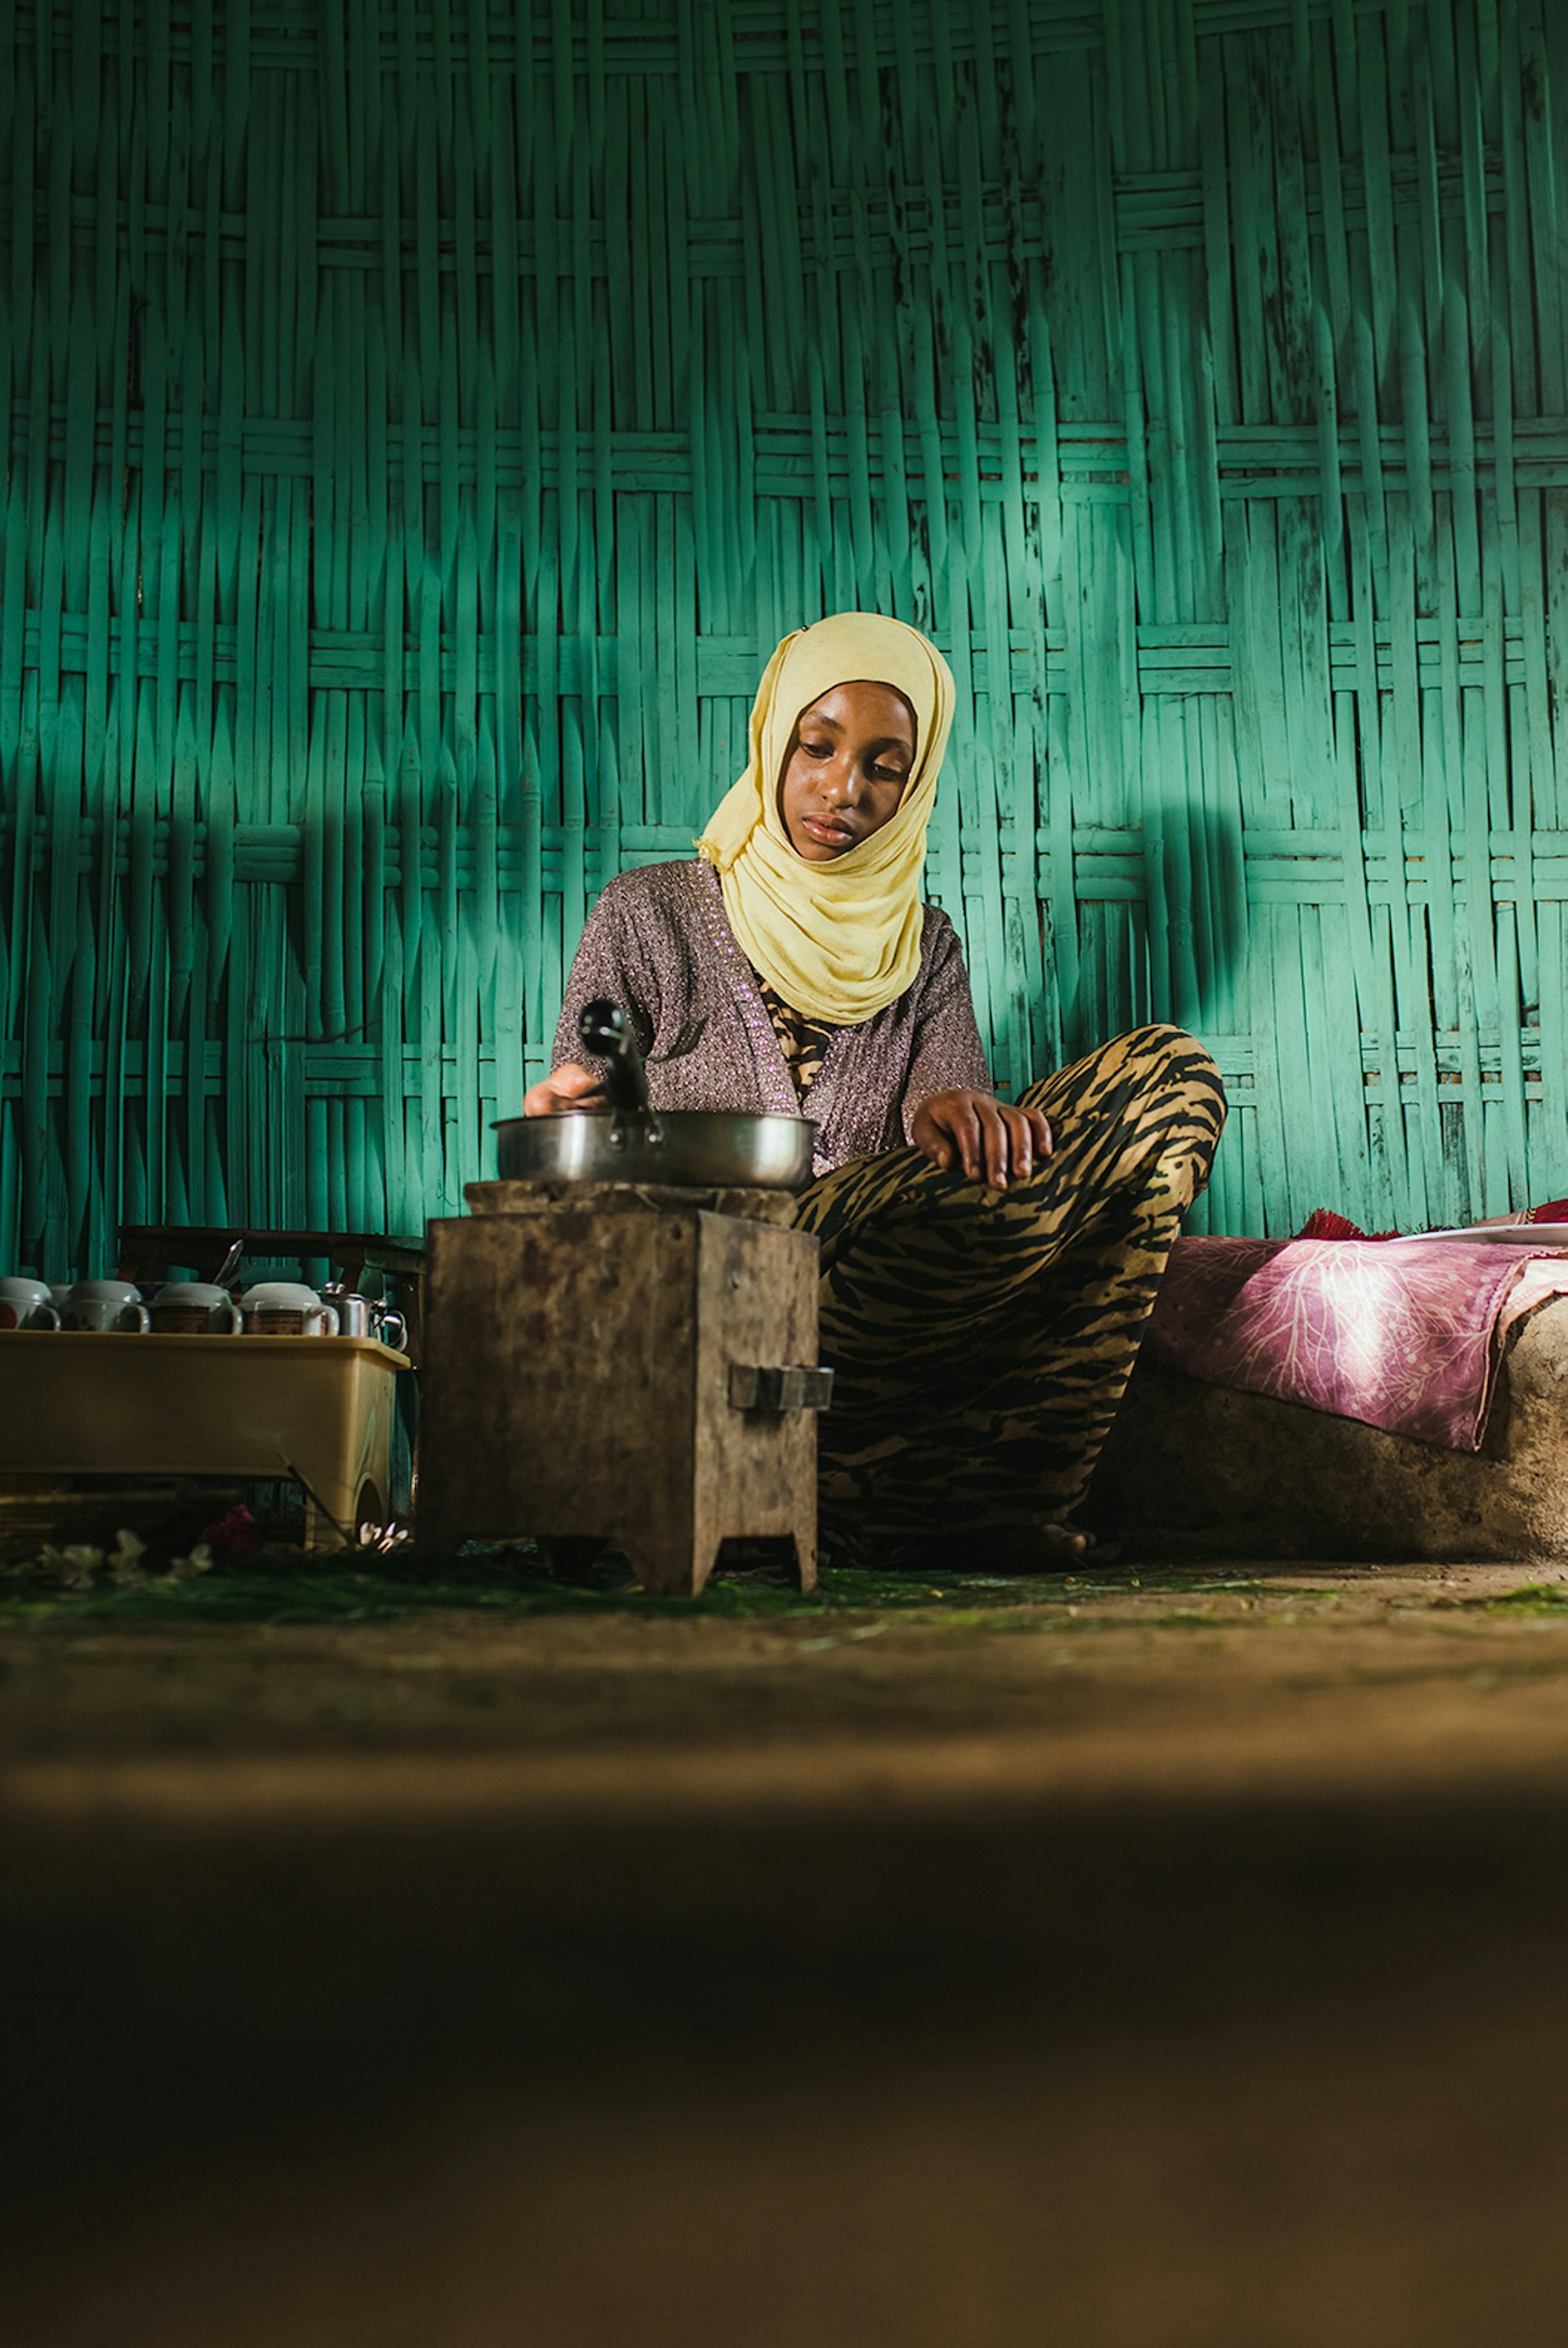 An Ethiopian girl prepares a coffee ceremony; she is wearing a yellow headscarf and sitting in front of a turquoise wall.